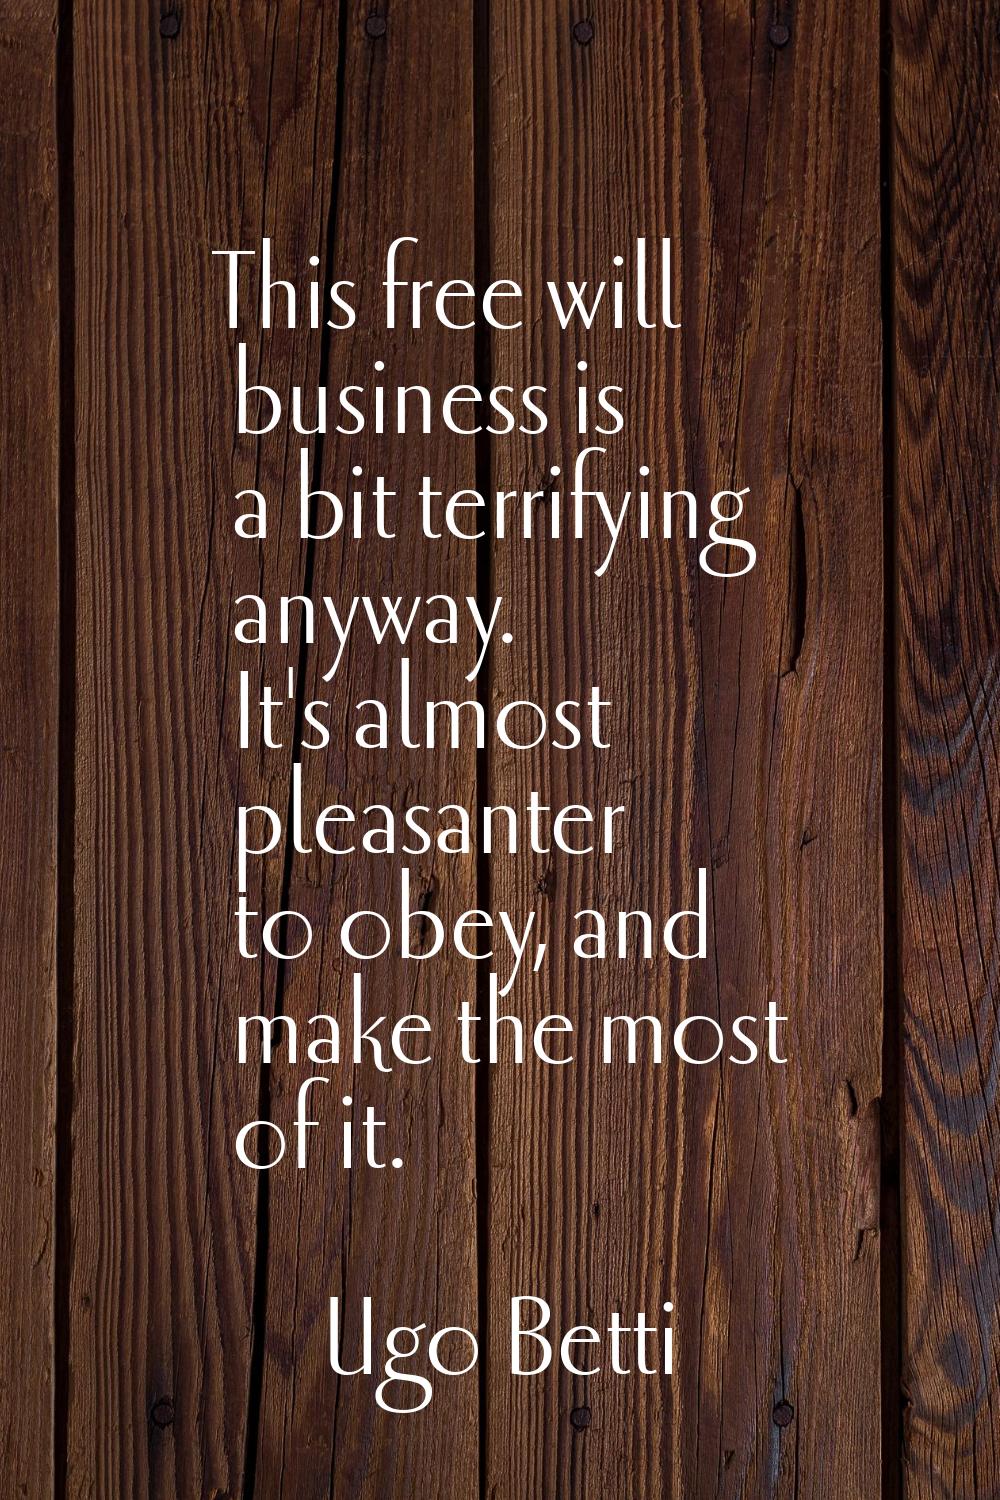 This free will business is a bit terrifying anyway. It's almost pleasanter to obey, and make the mo